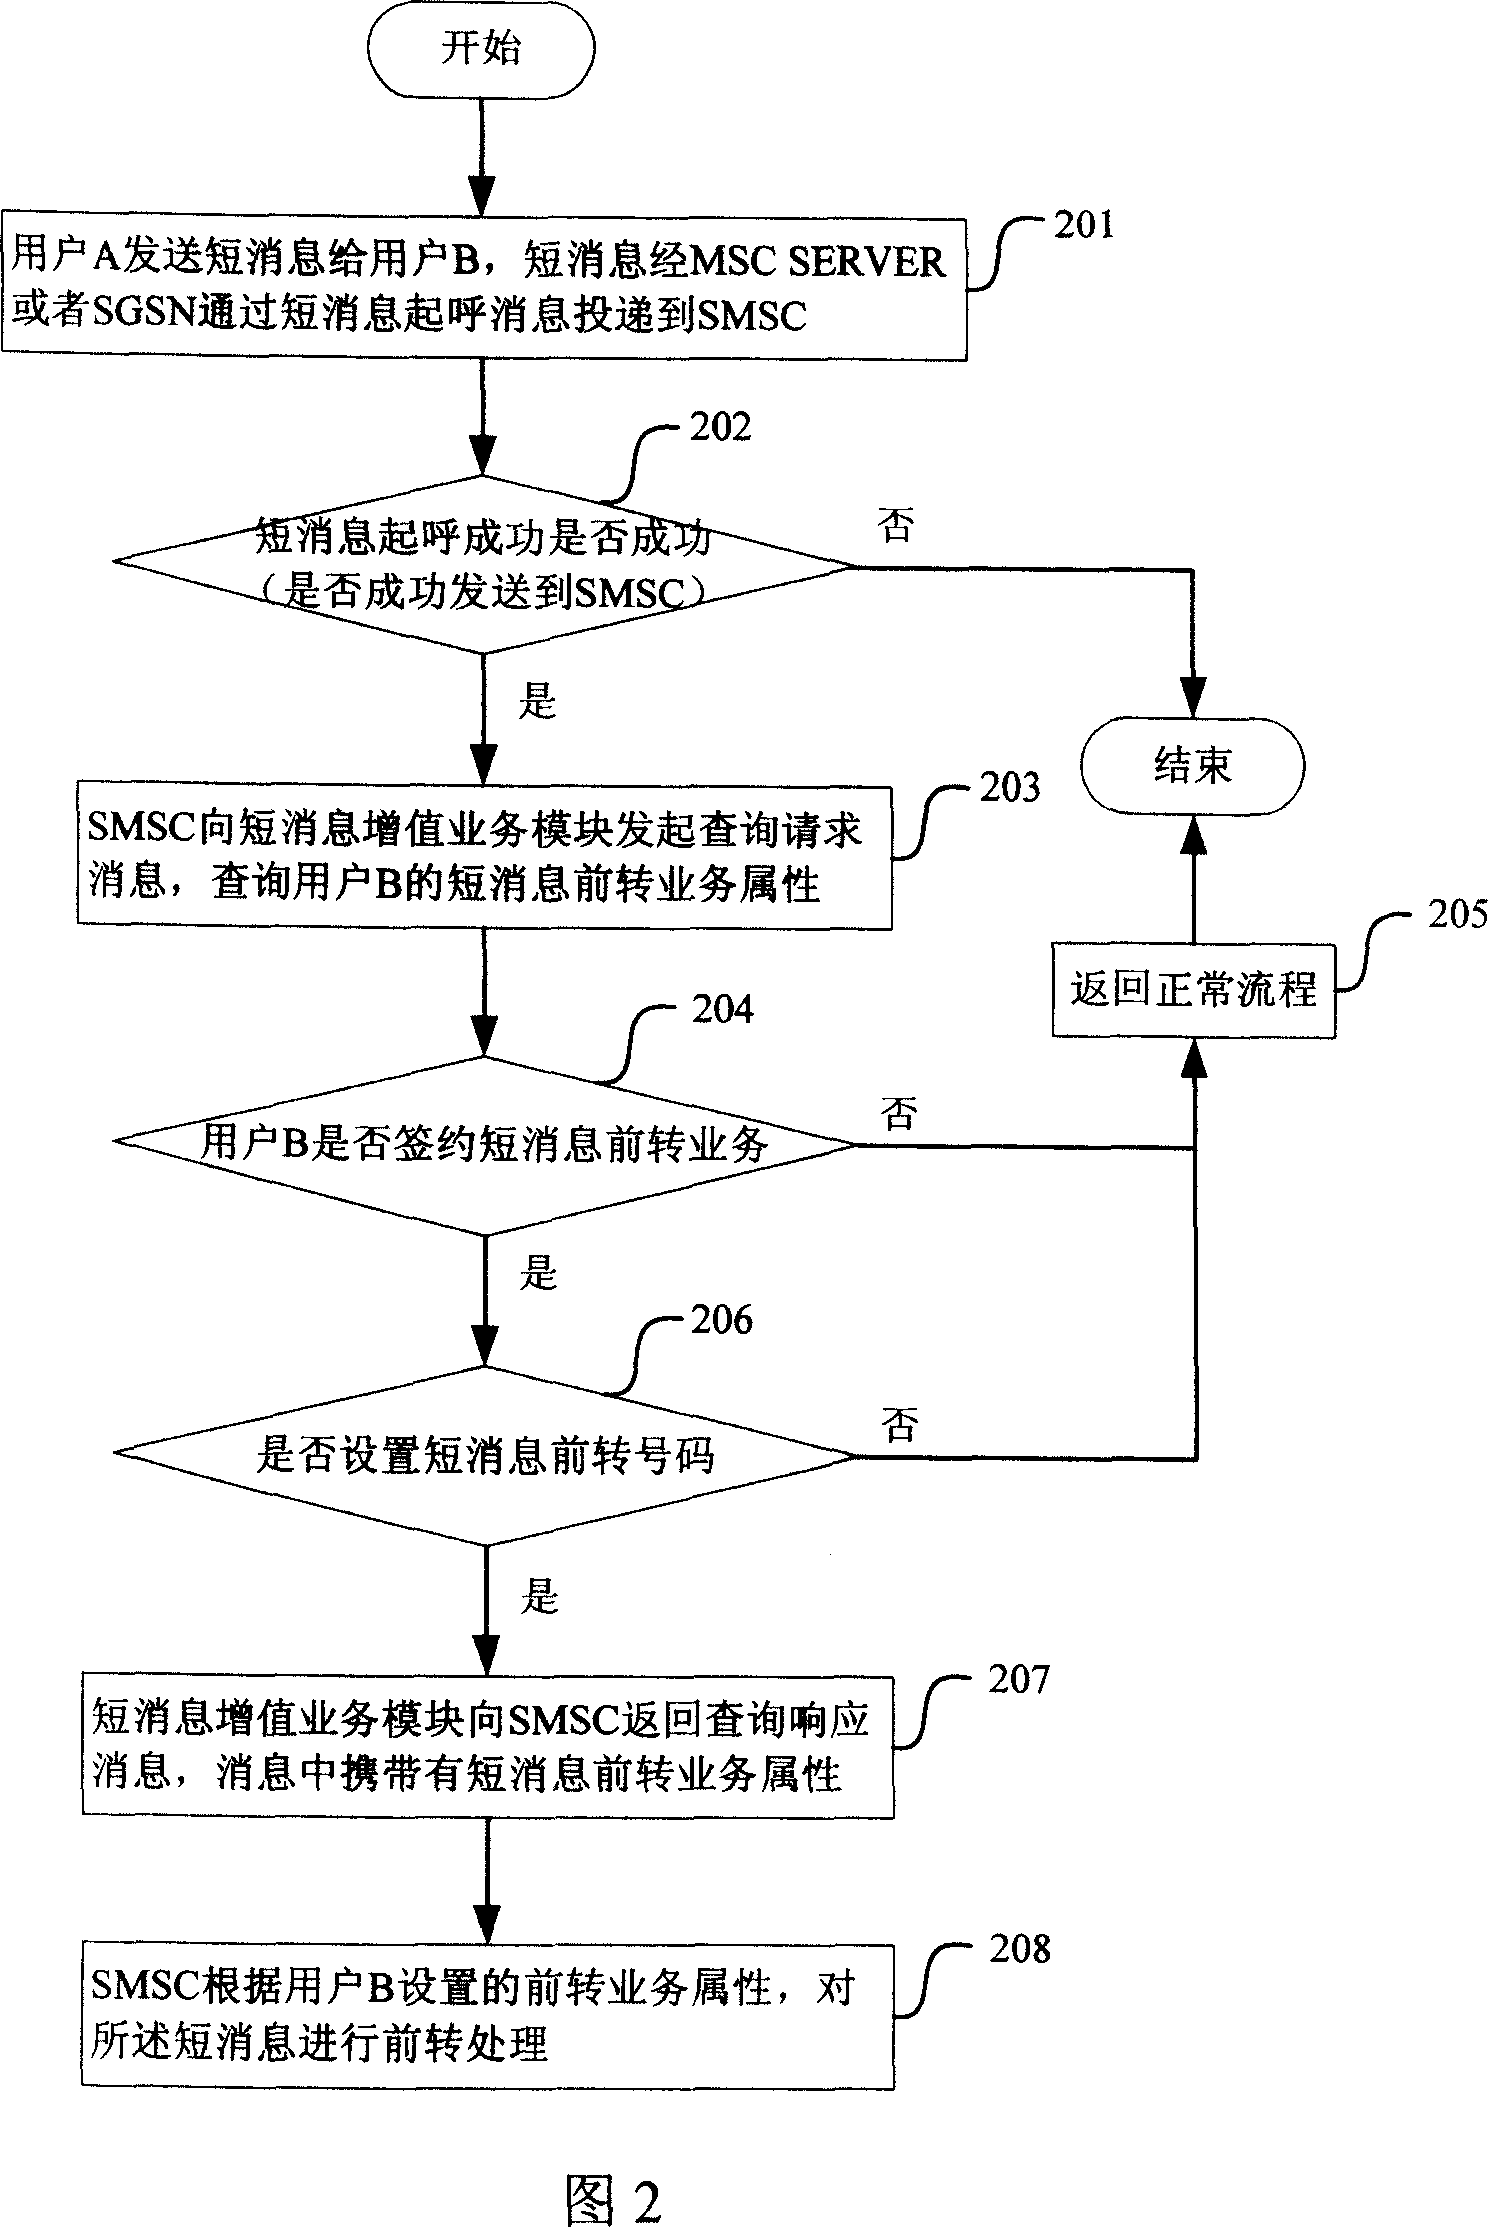 A device and method for realizing automatic SMS forward